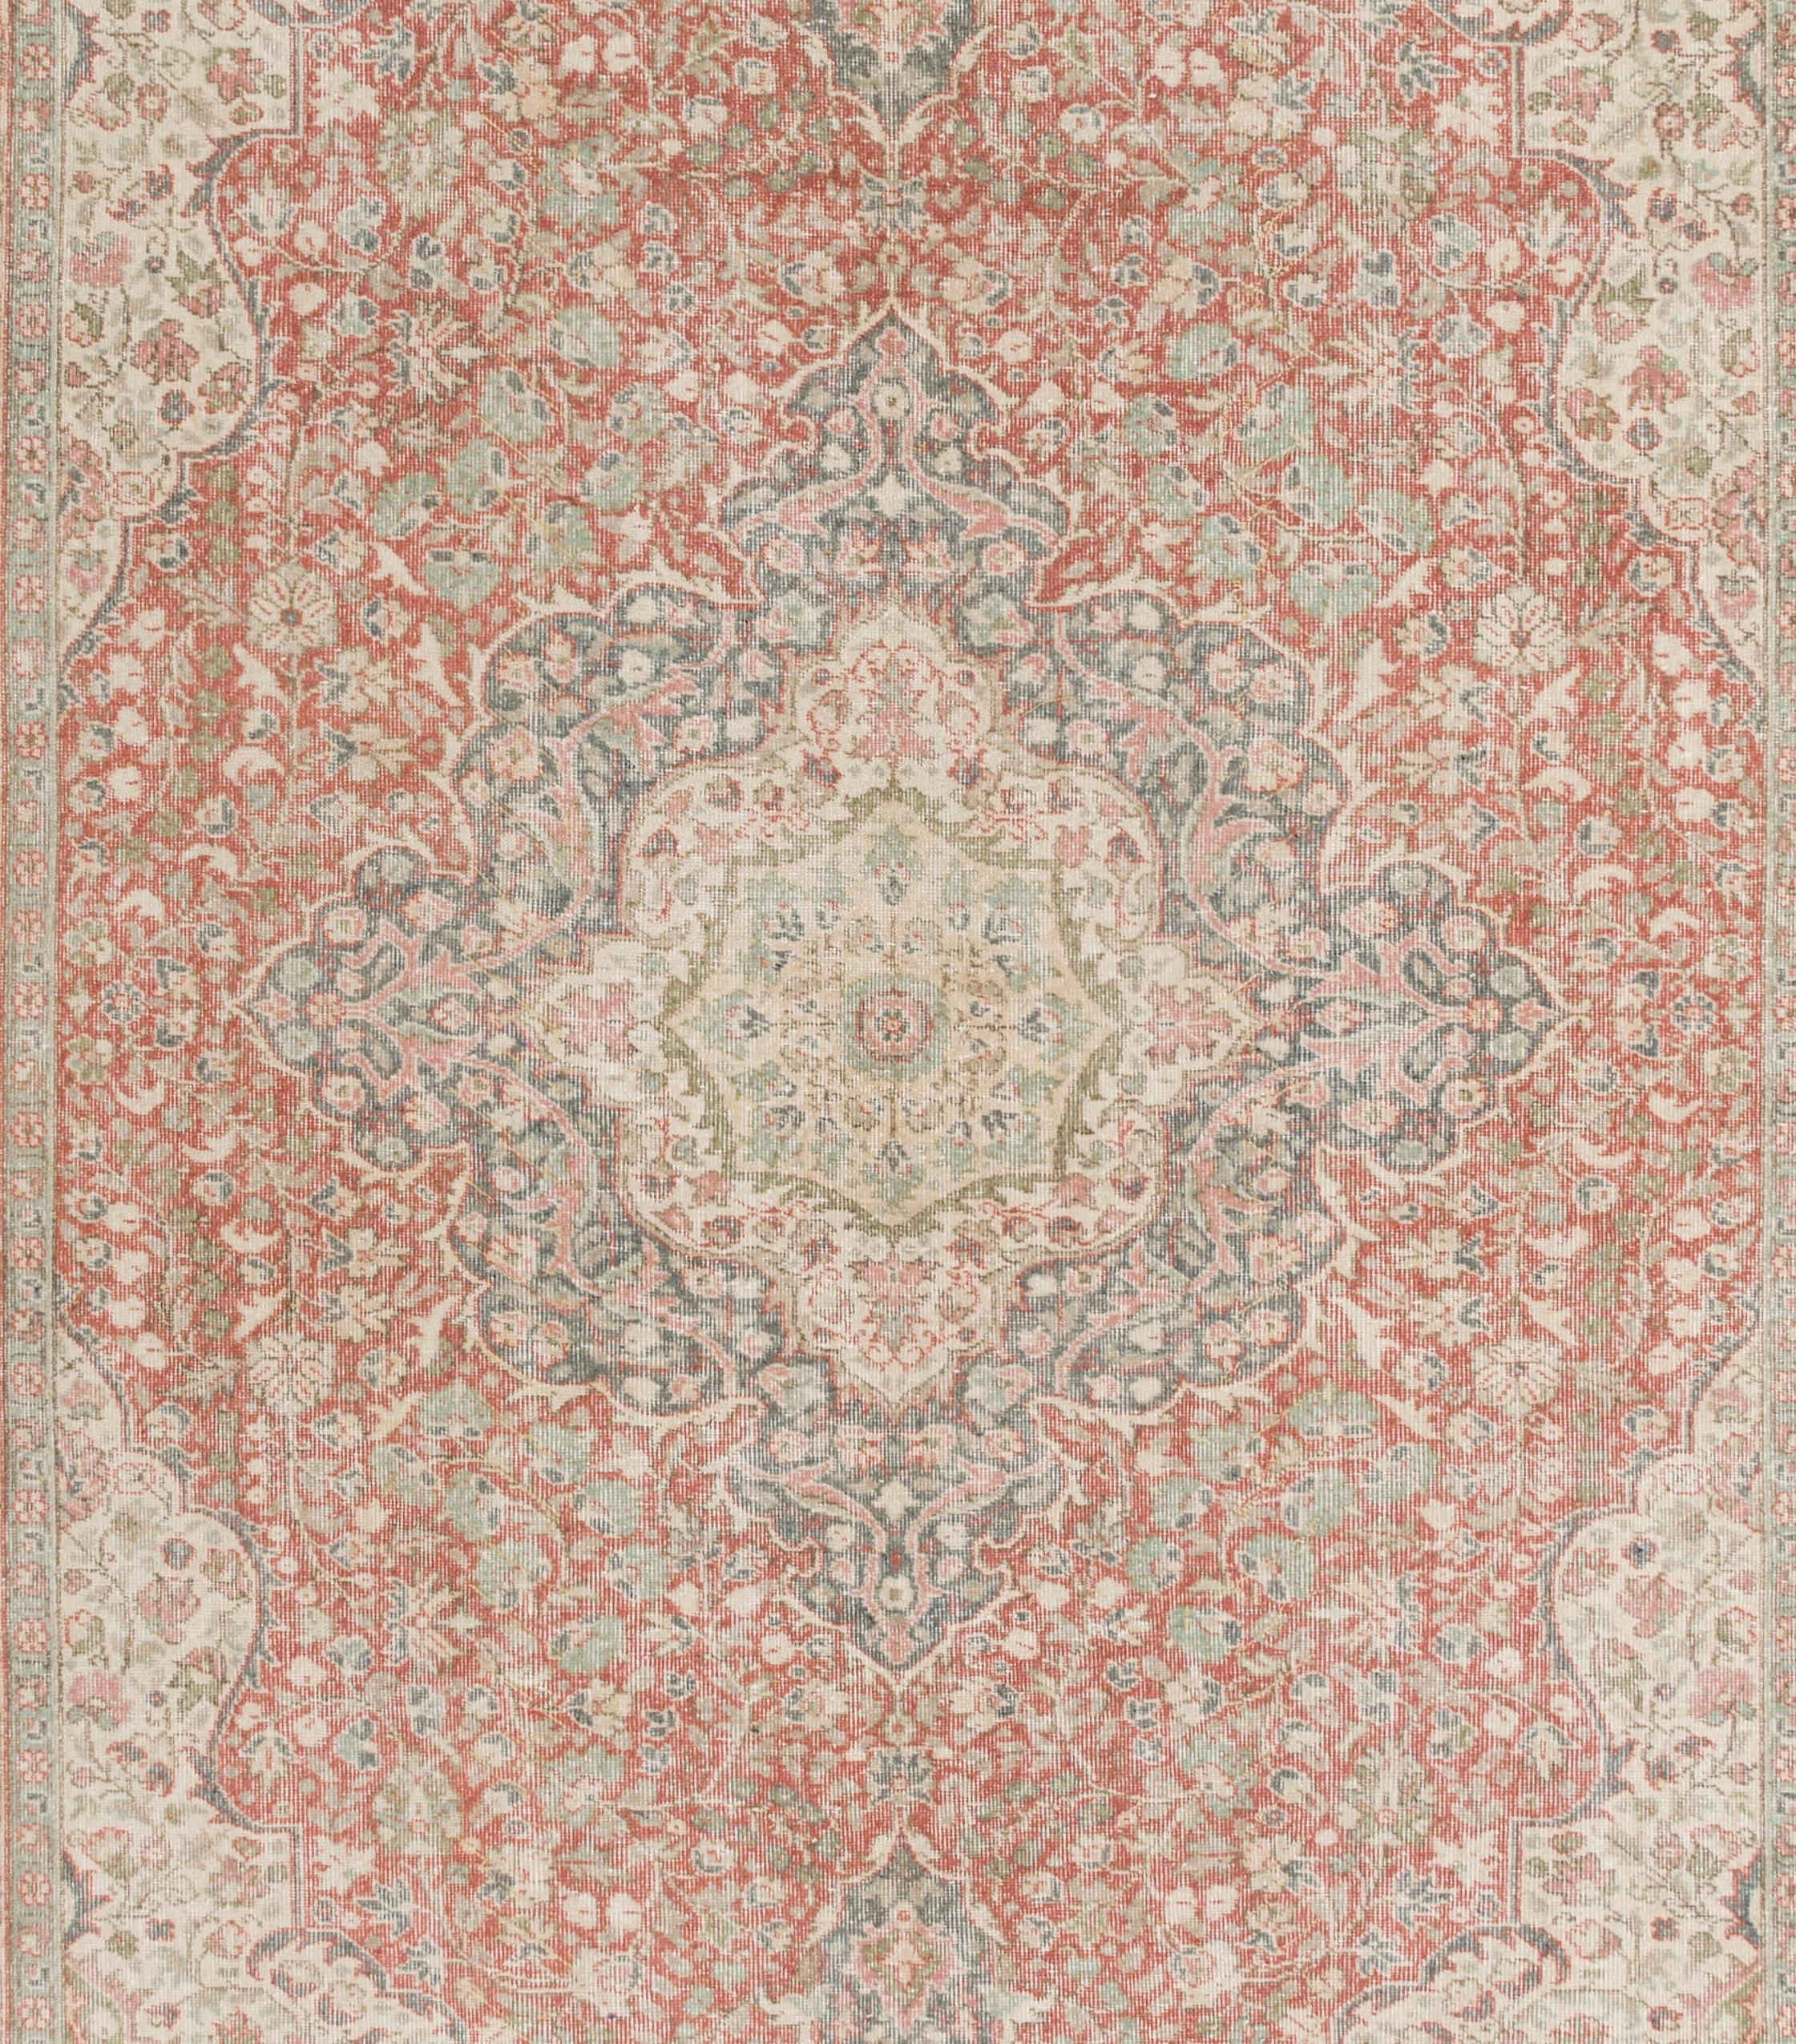 Hand-Woven 8.8x13 Ft One-of-a-Kind Mid-20th Century Turkish Wool Area Rug in Muted Colors For Sale